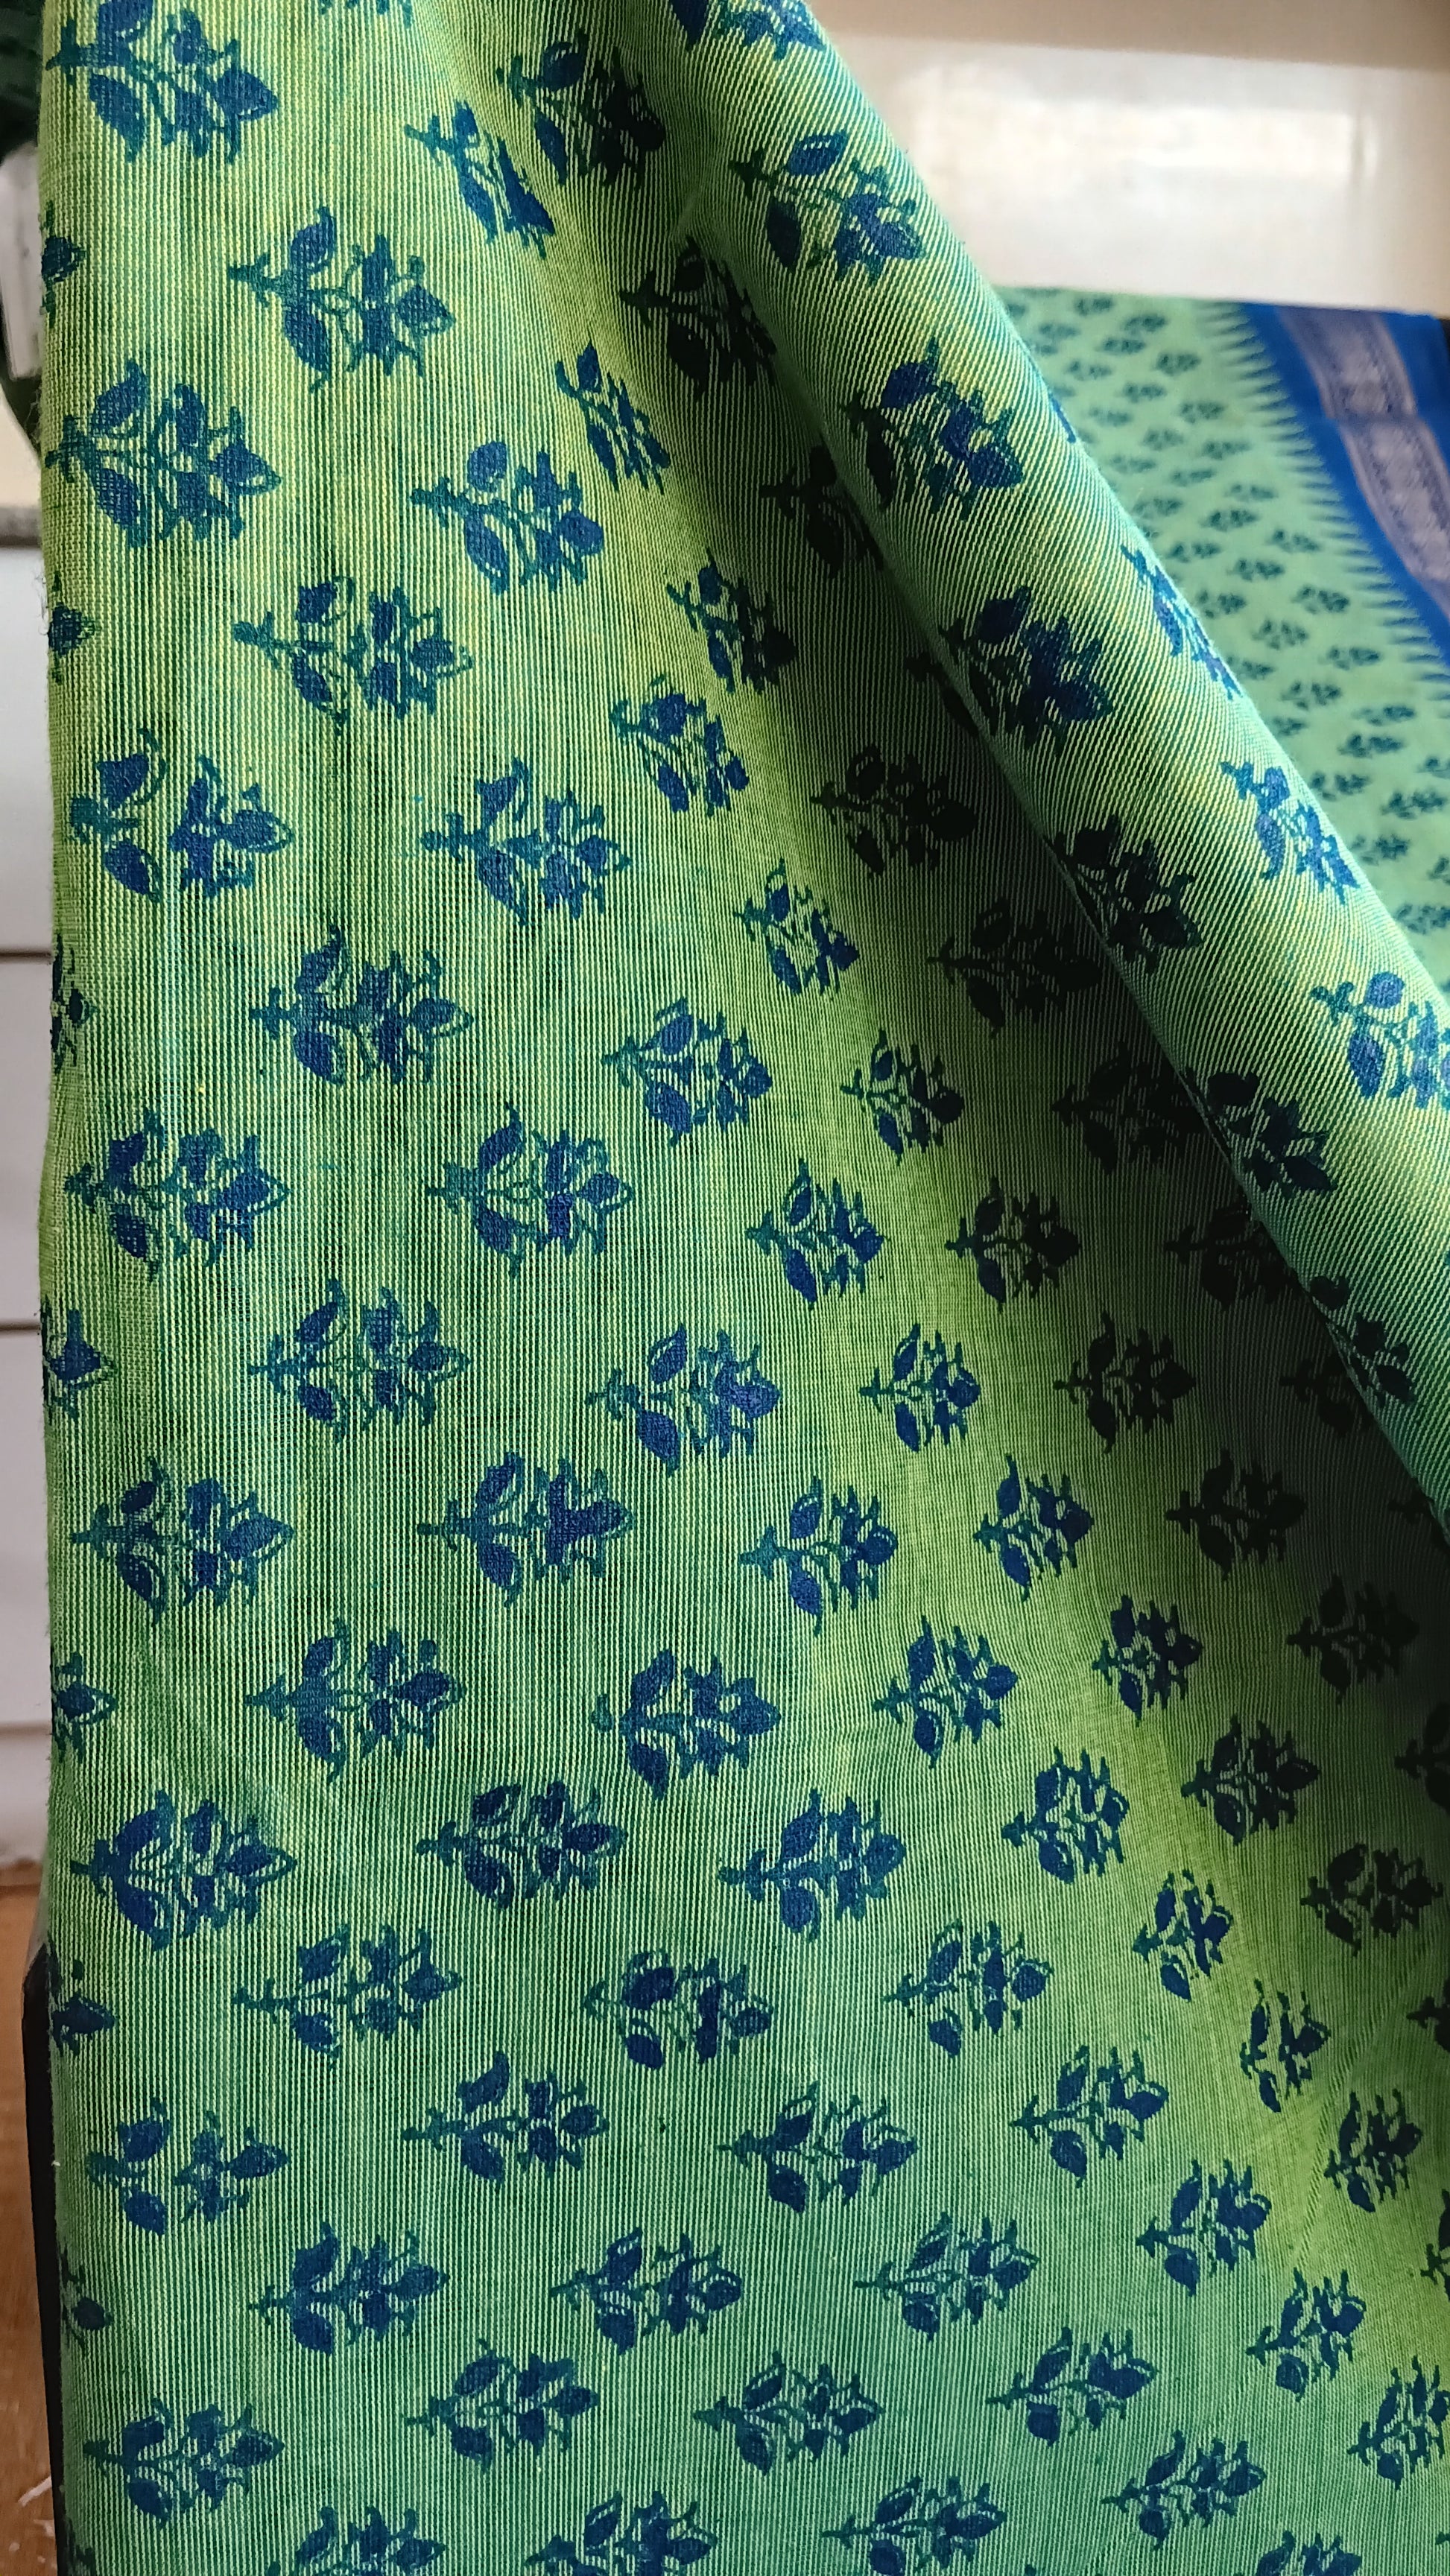 Close up view of the floral pattern block printed on the body of a funtion wear saree woven in south India